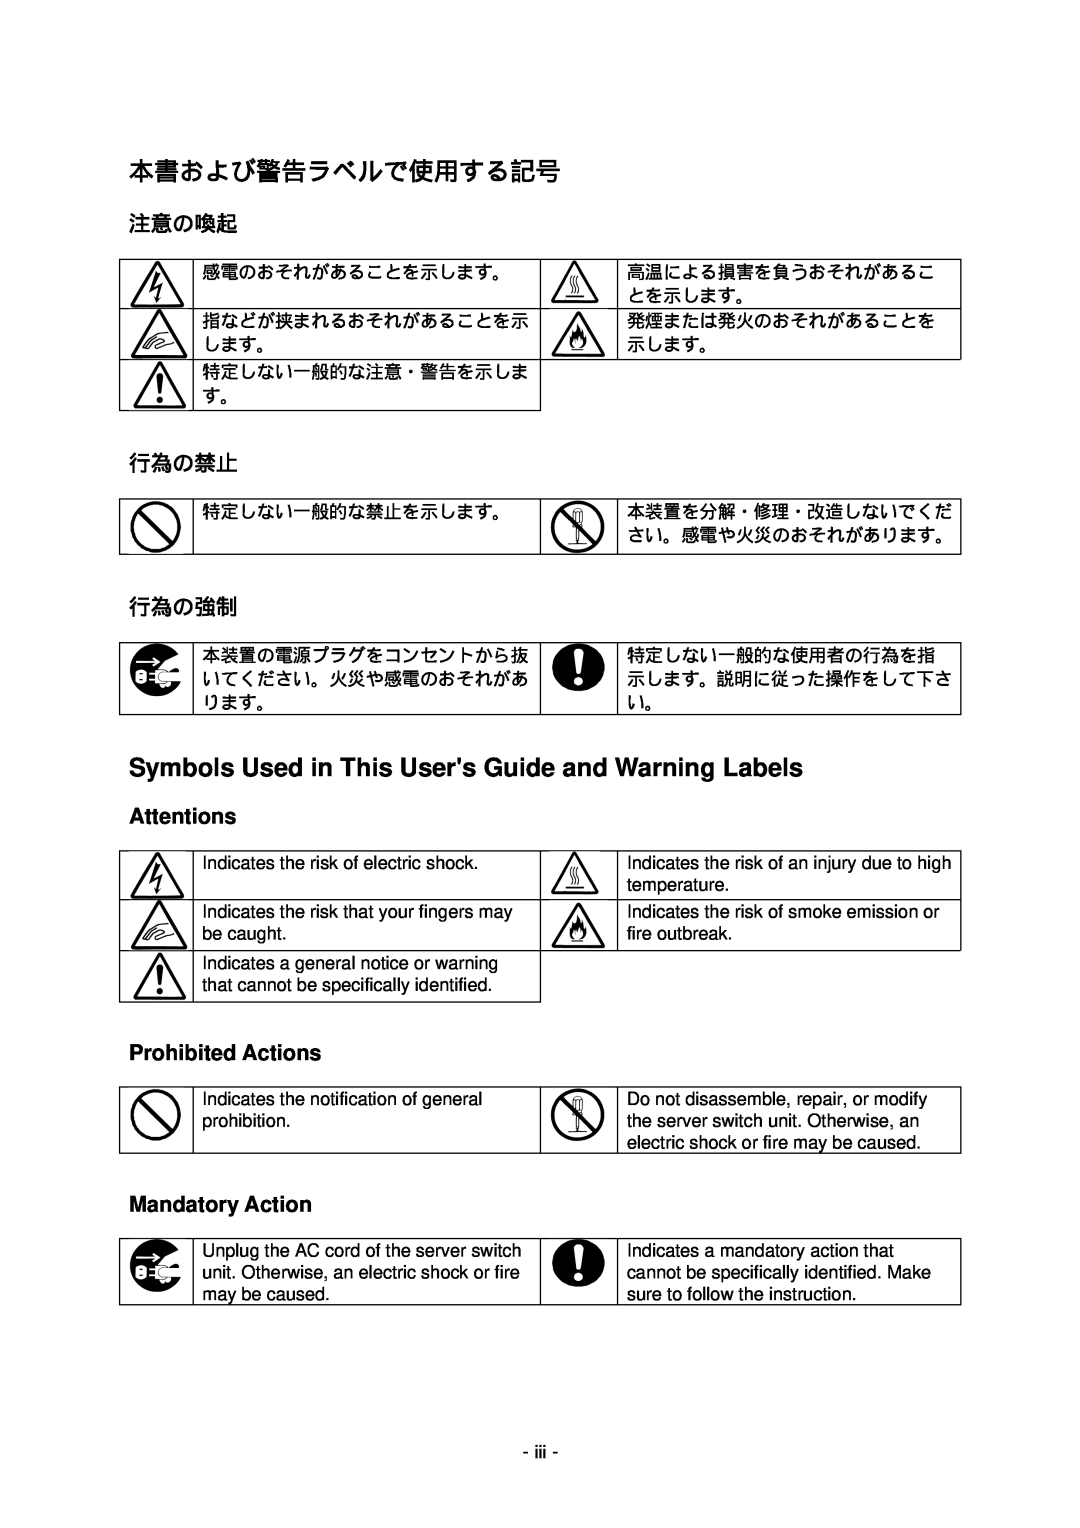 NEC N8191-09 manual Symbols Used in This Users Guide and Warning Labels, 本書および警告ラベルで使用する記号 注意の喚起, 行為の禁止, 行為の強制, Attentions 